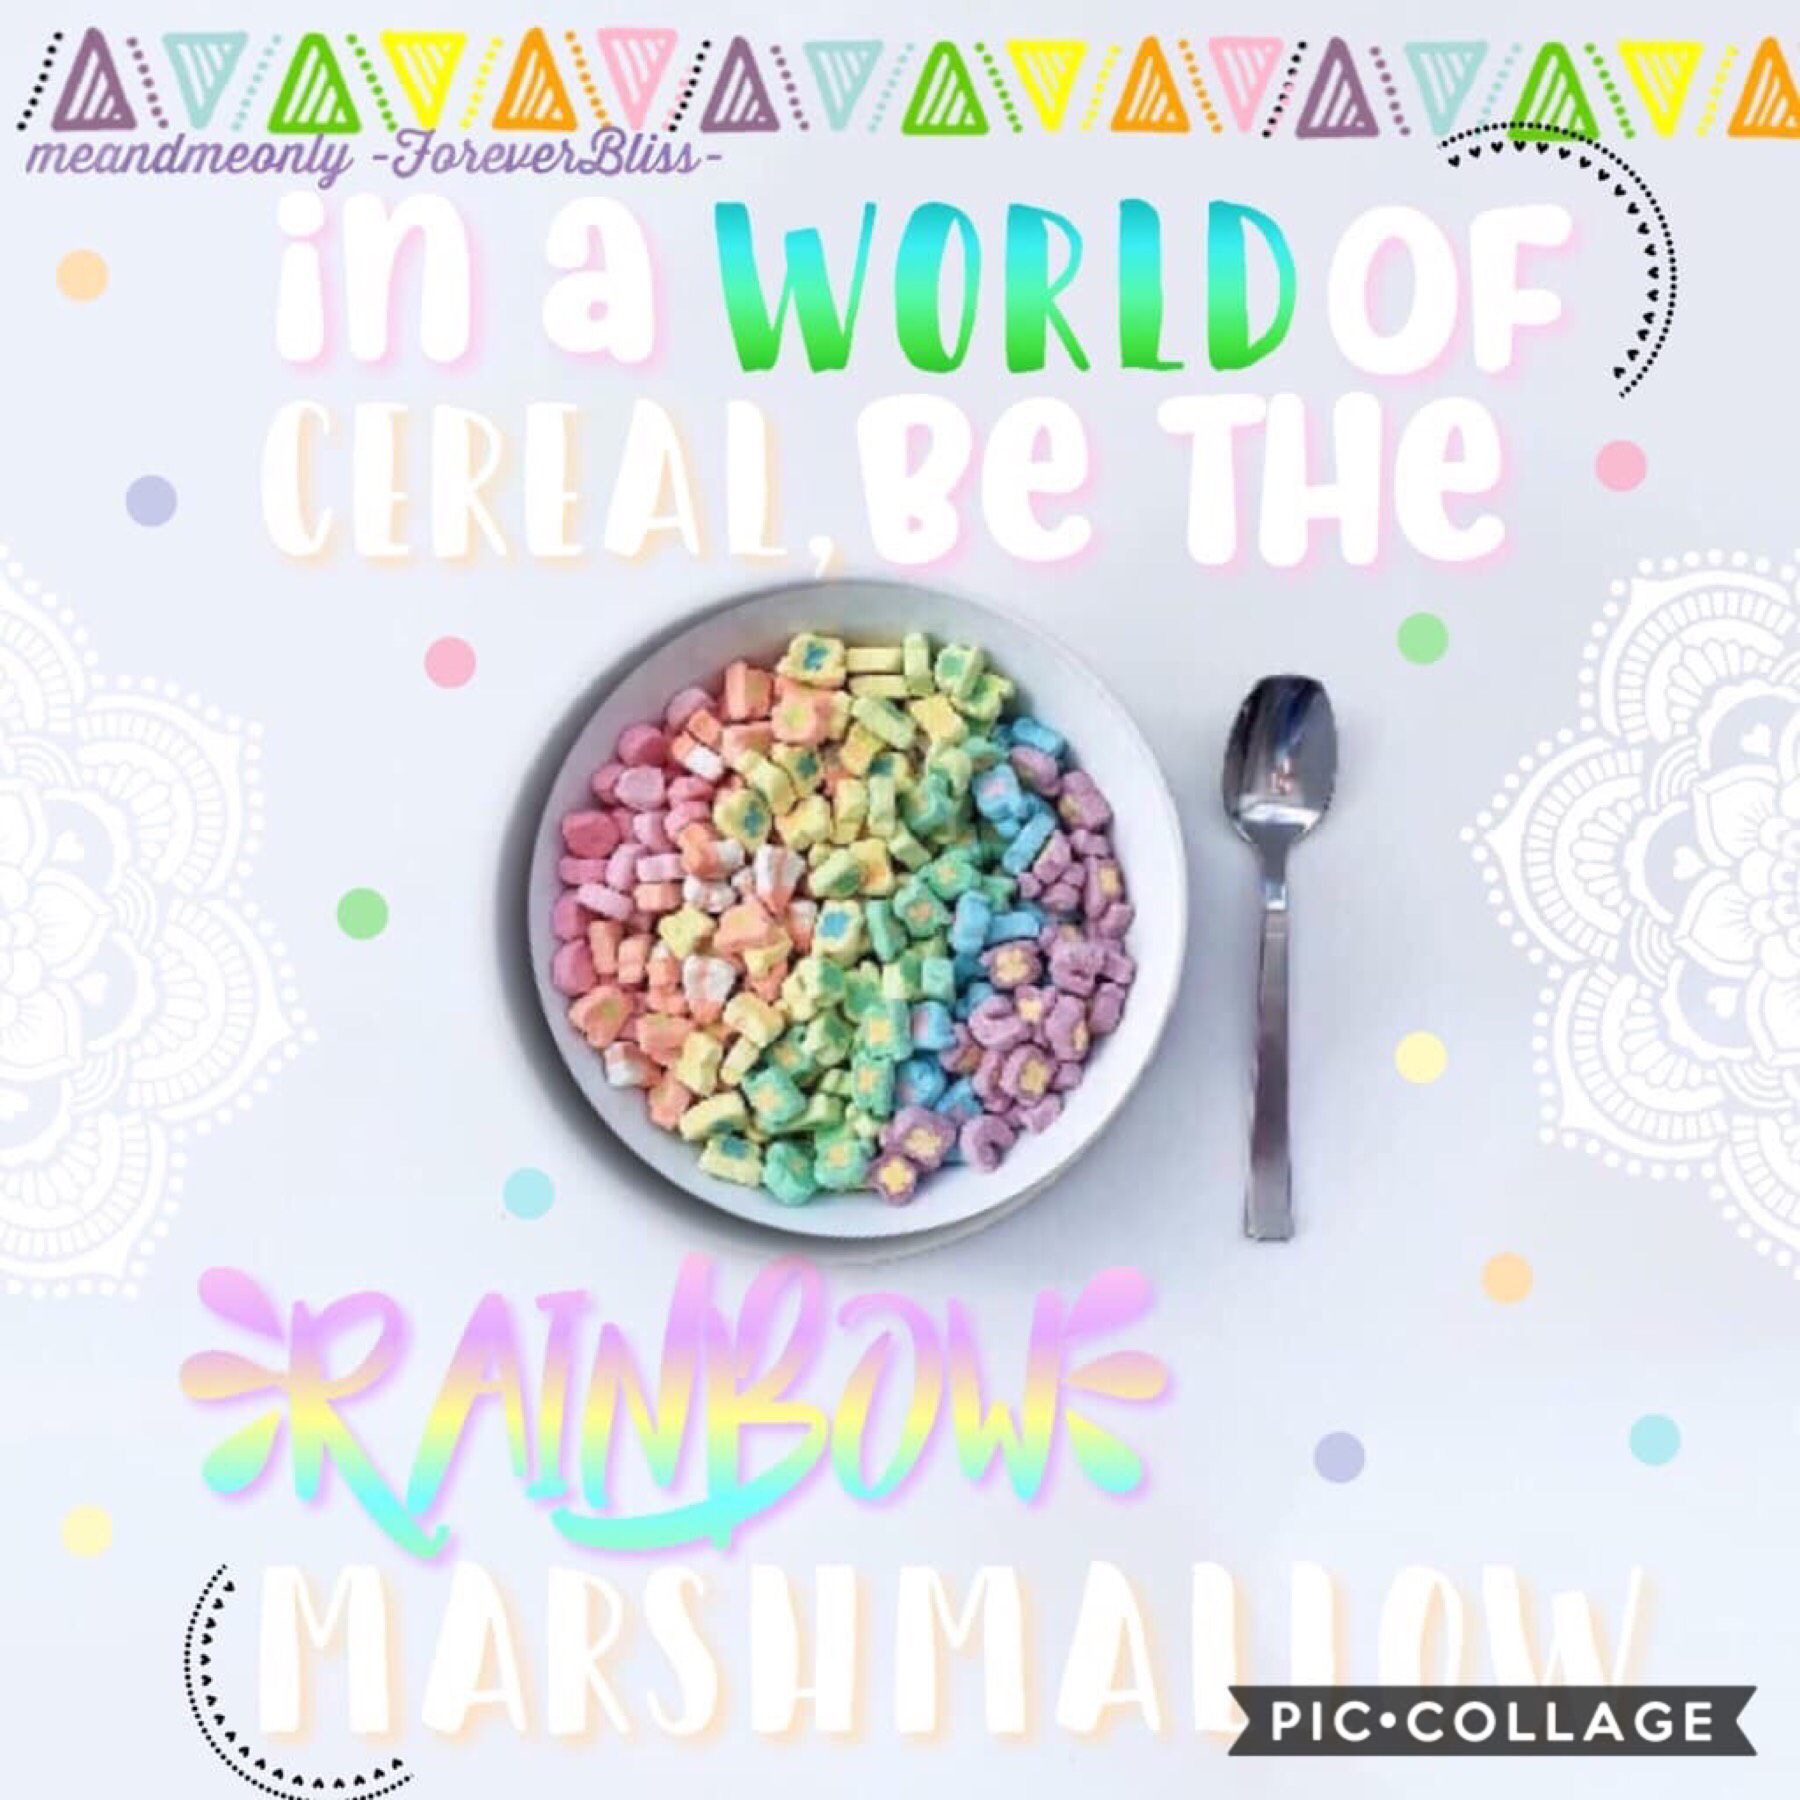 collab with yeh absolute queen....
-ForeverBliss- 👑 everyone go follow her, she’s so amazing and makes the best collages! please like my recents and thanks for the feature! love all of you queens. QOTD: do you have Pinterest? AOTD: yes and I love it